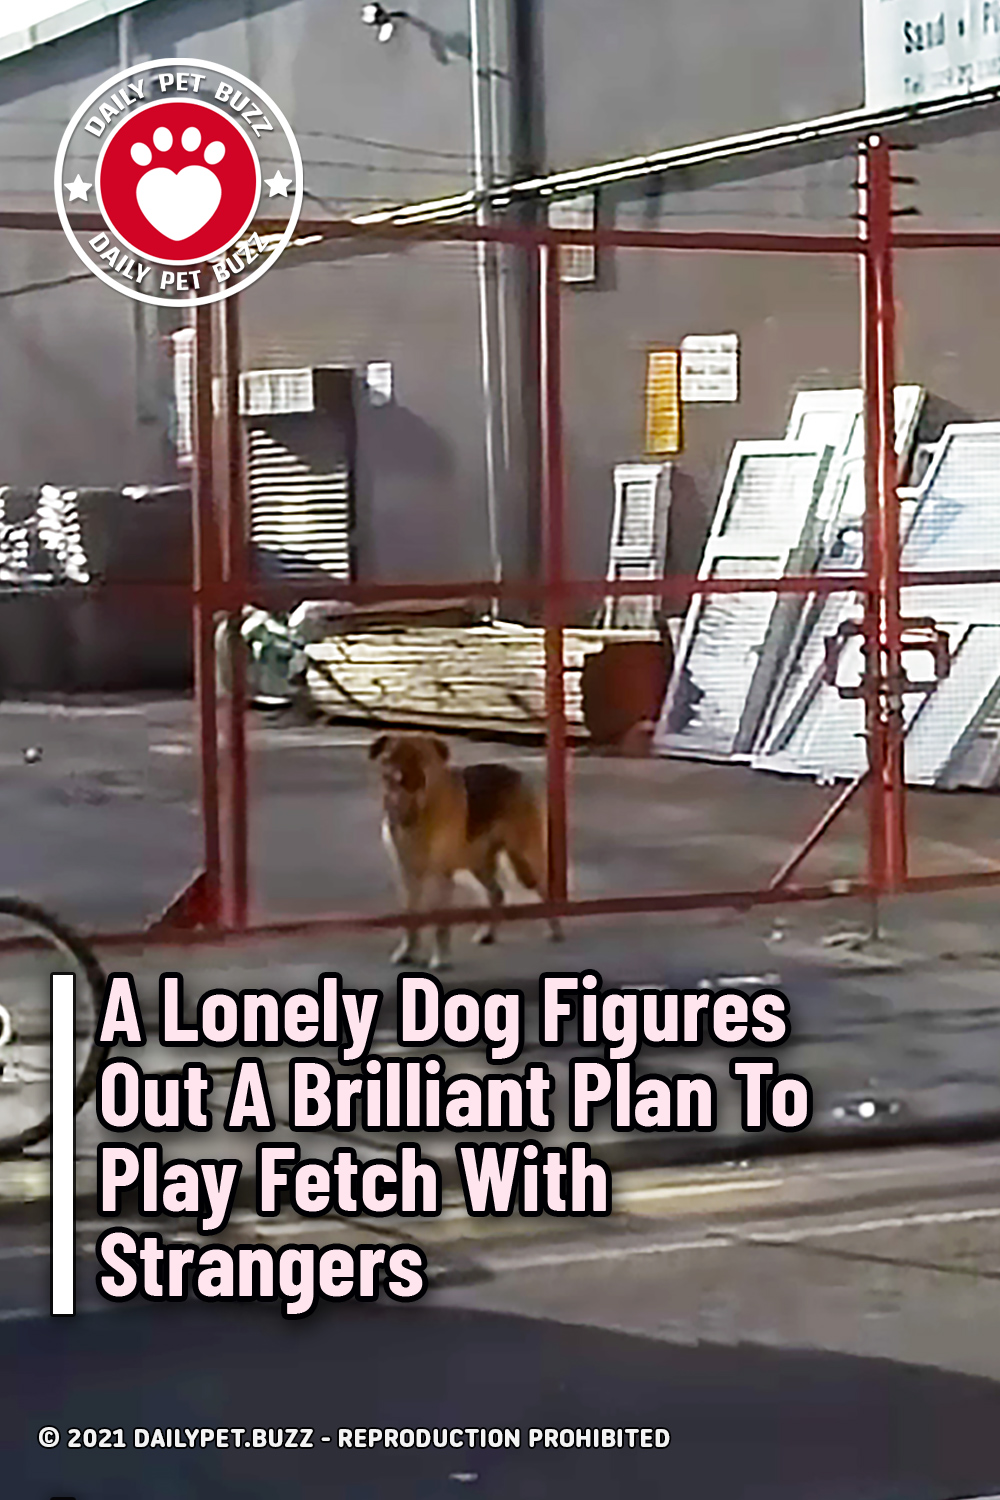 A Lonely Dog Figures Out A Brilliant Plan To Play Fetch With Strangers